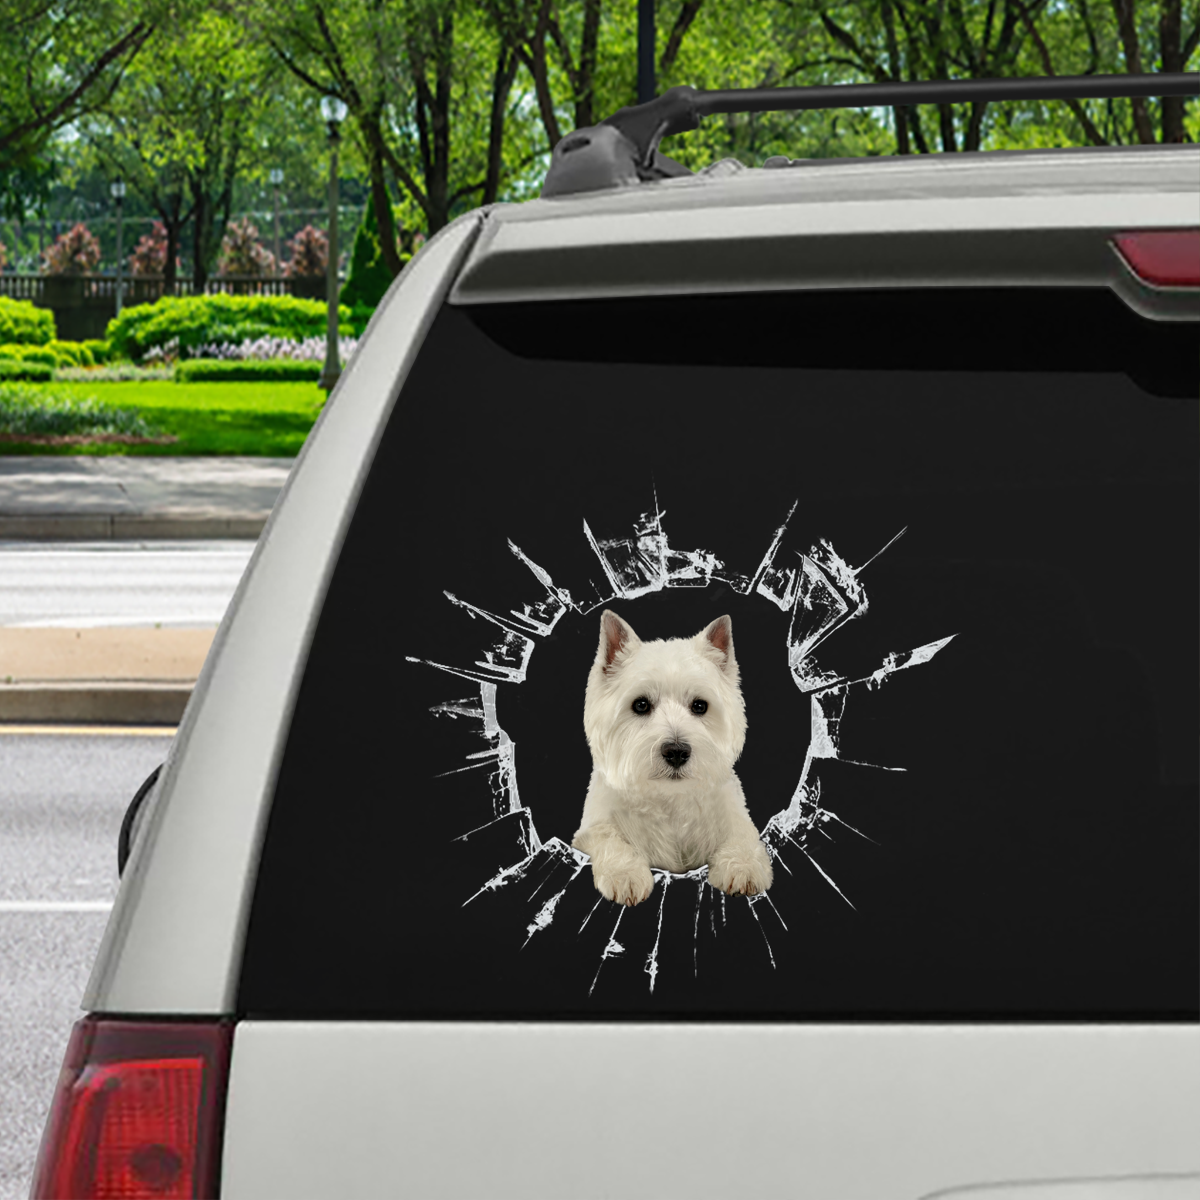 Get In - It's Time For Shopping - West Highland White Terrier Car Sticker V1